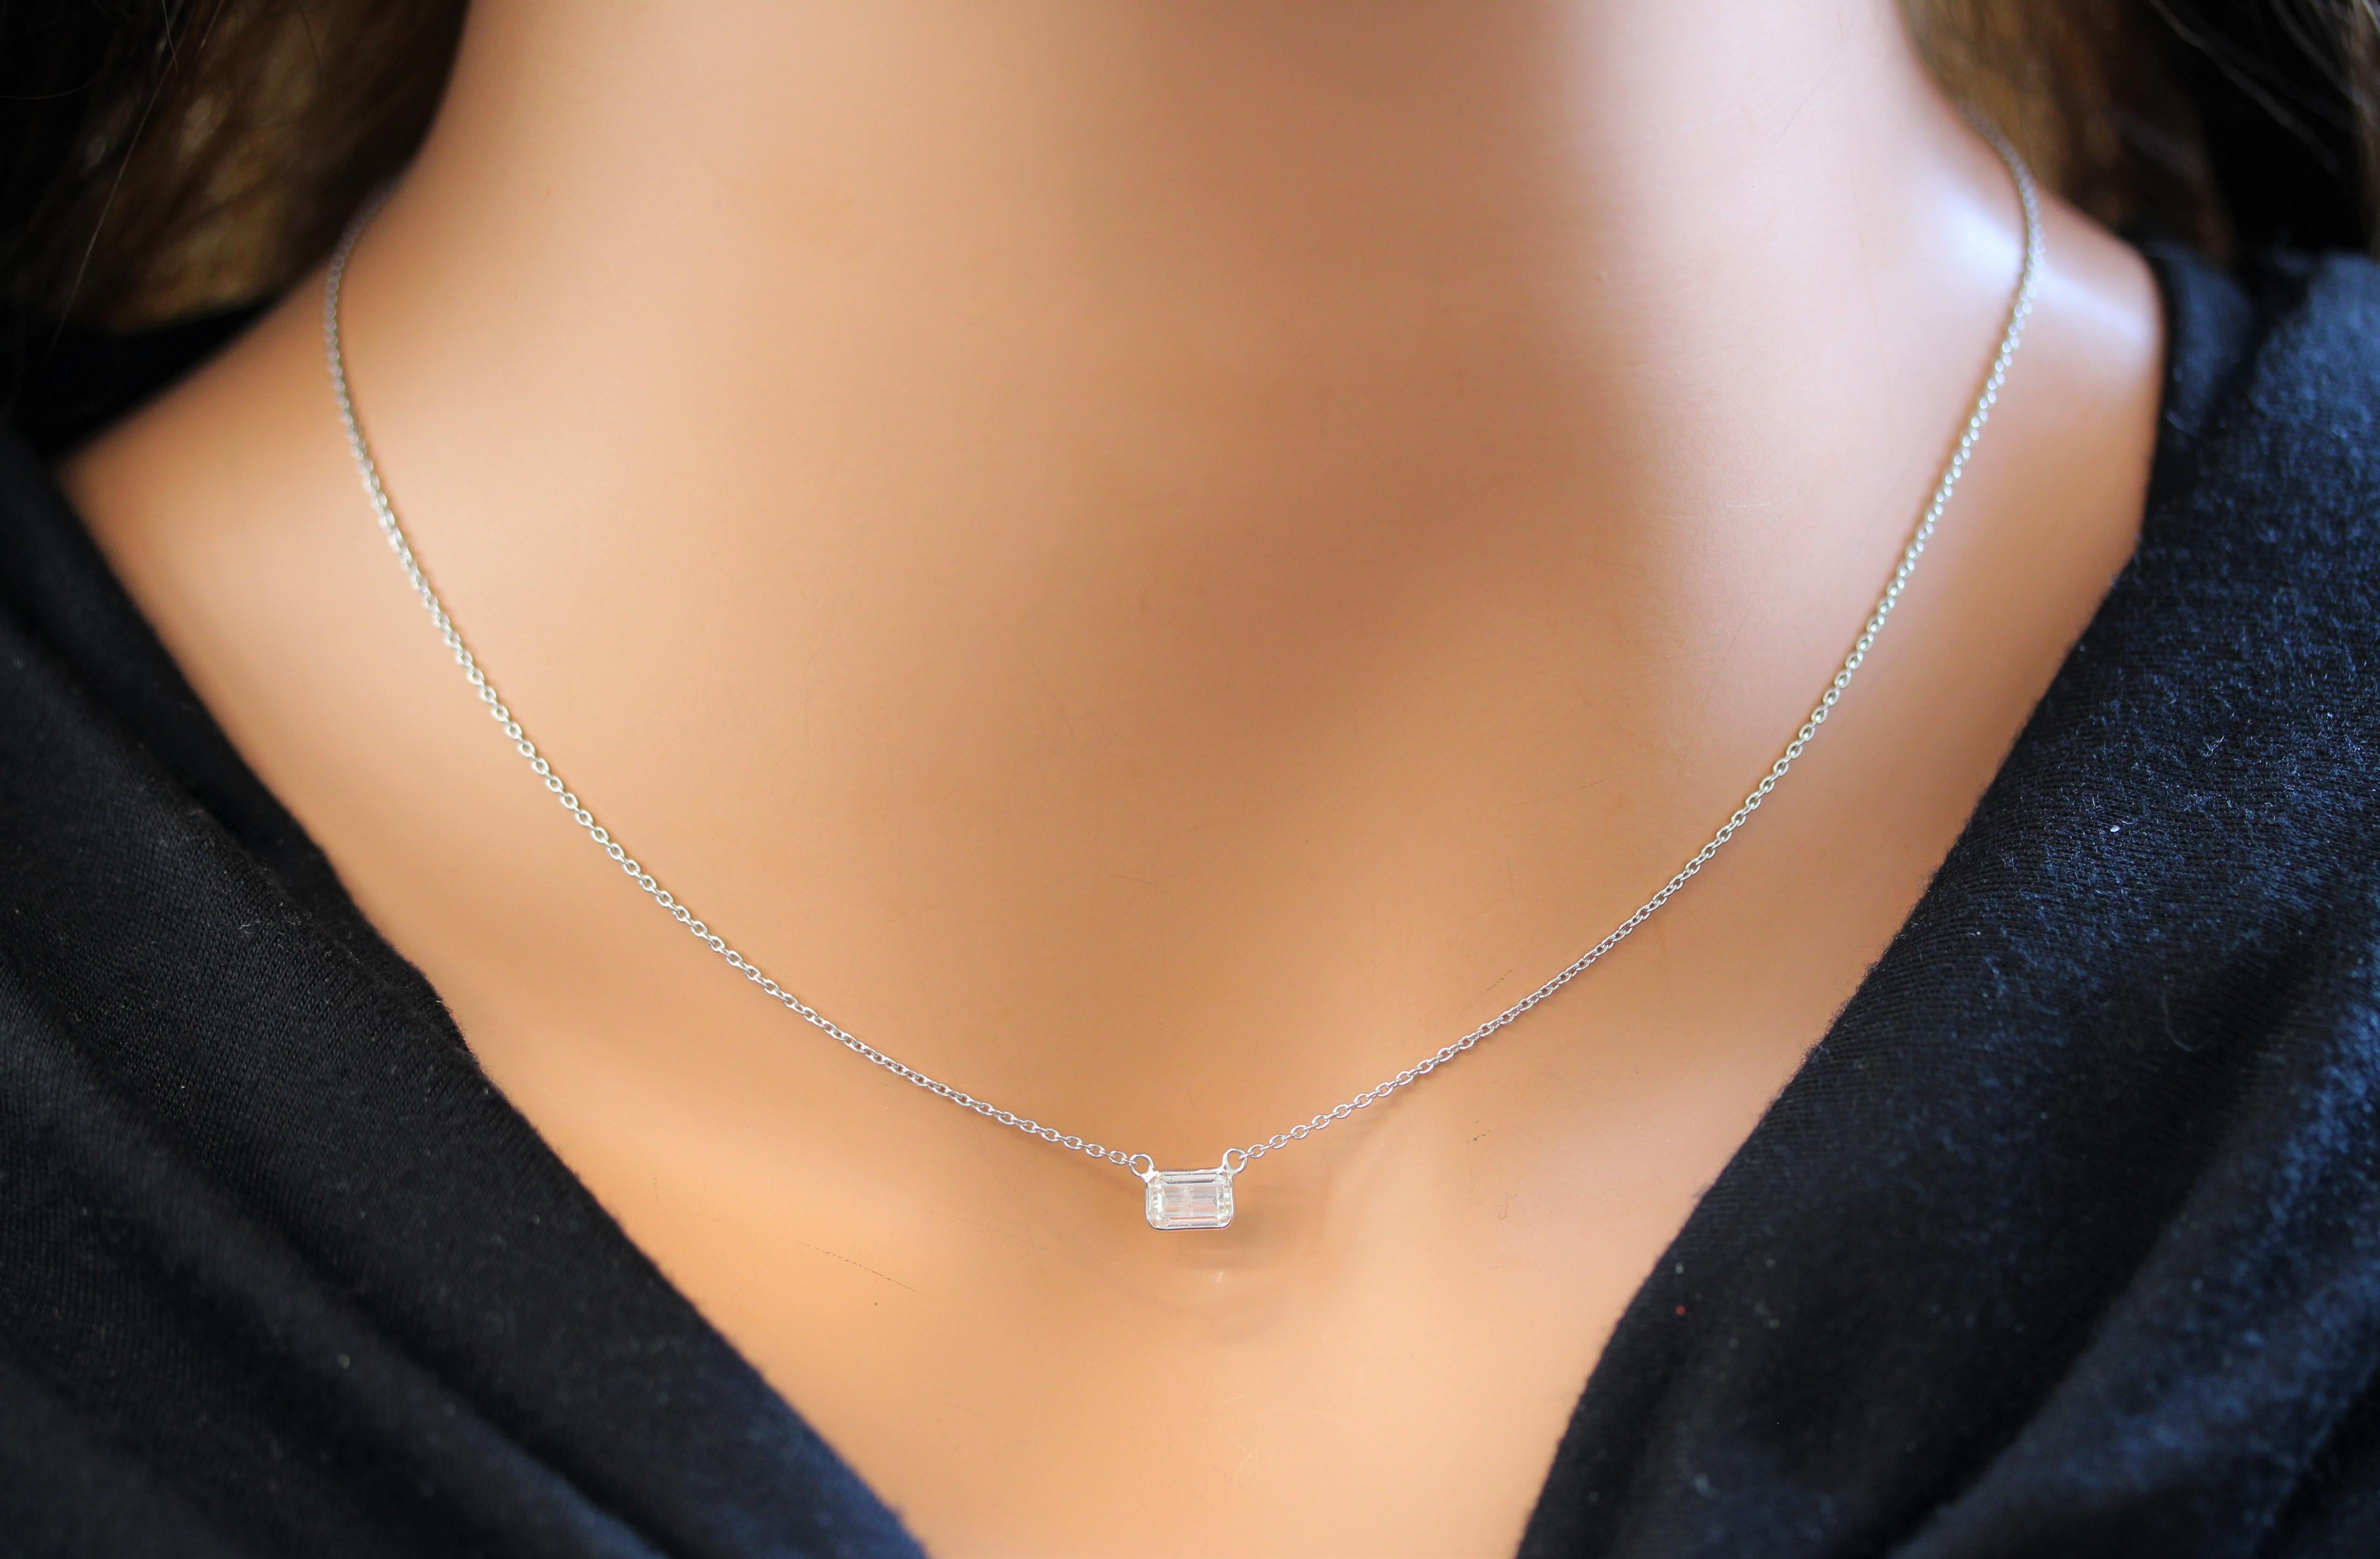 Make a statement worn solo and level up your collar candy when layered. How would you wear it? This is a natural Emerald, gem type, color G and clarity I1, handmade necklace wire-wrapped in 14k white gold. This is a piece you'll wear forever. We